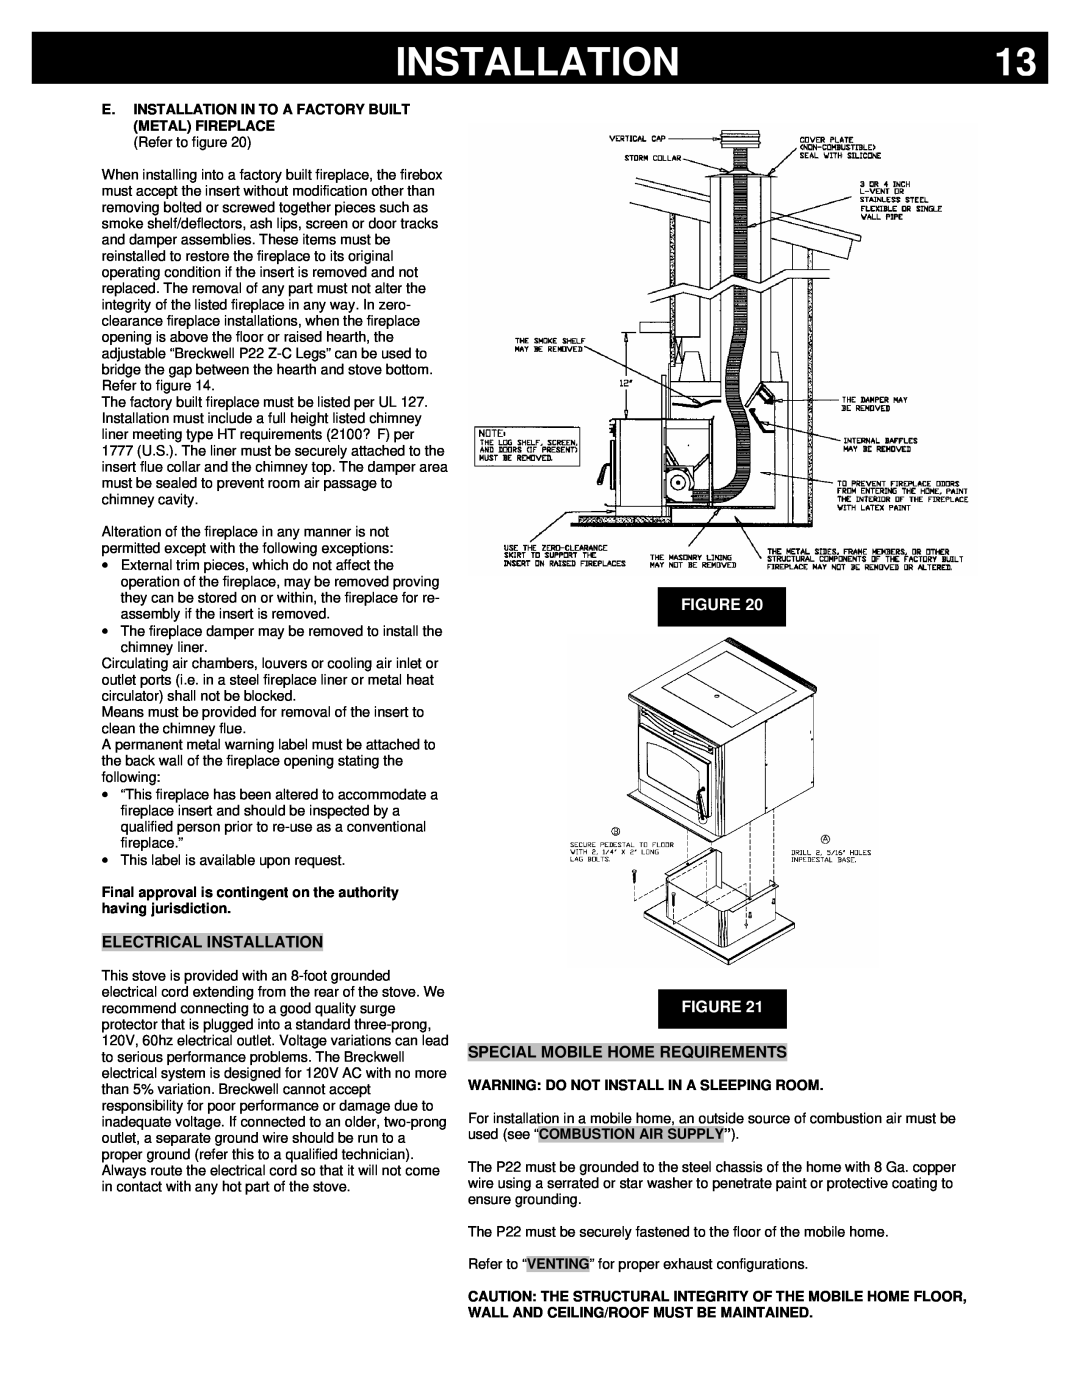 Breckwell P22I, P22FSL, P22FSA owner manual Electrical Installation, Figure Figure, Special Mobile Home Requirements 